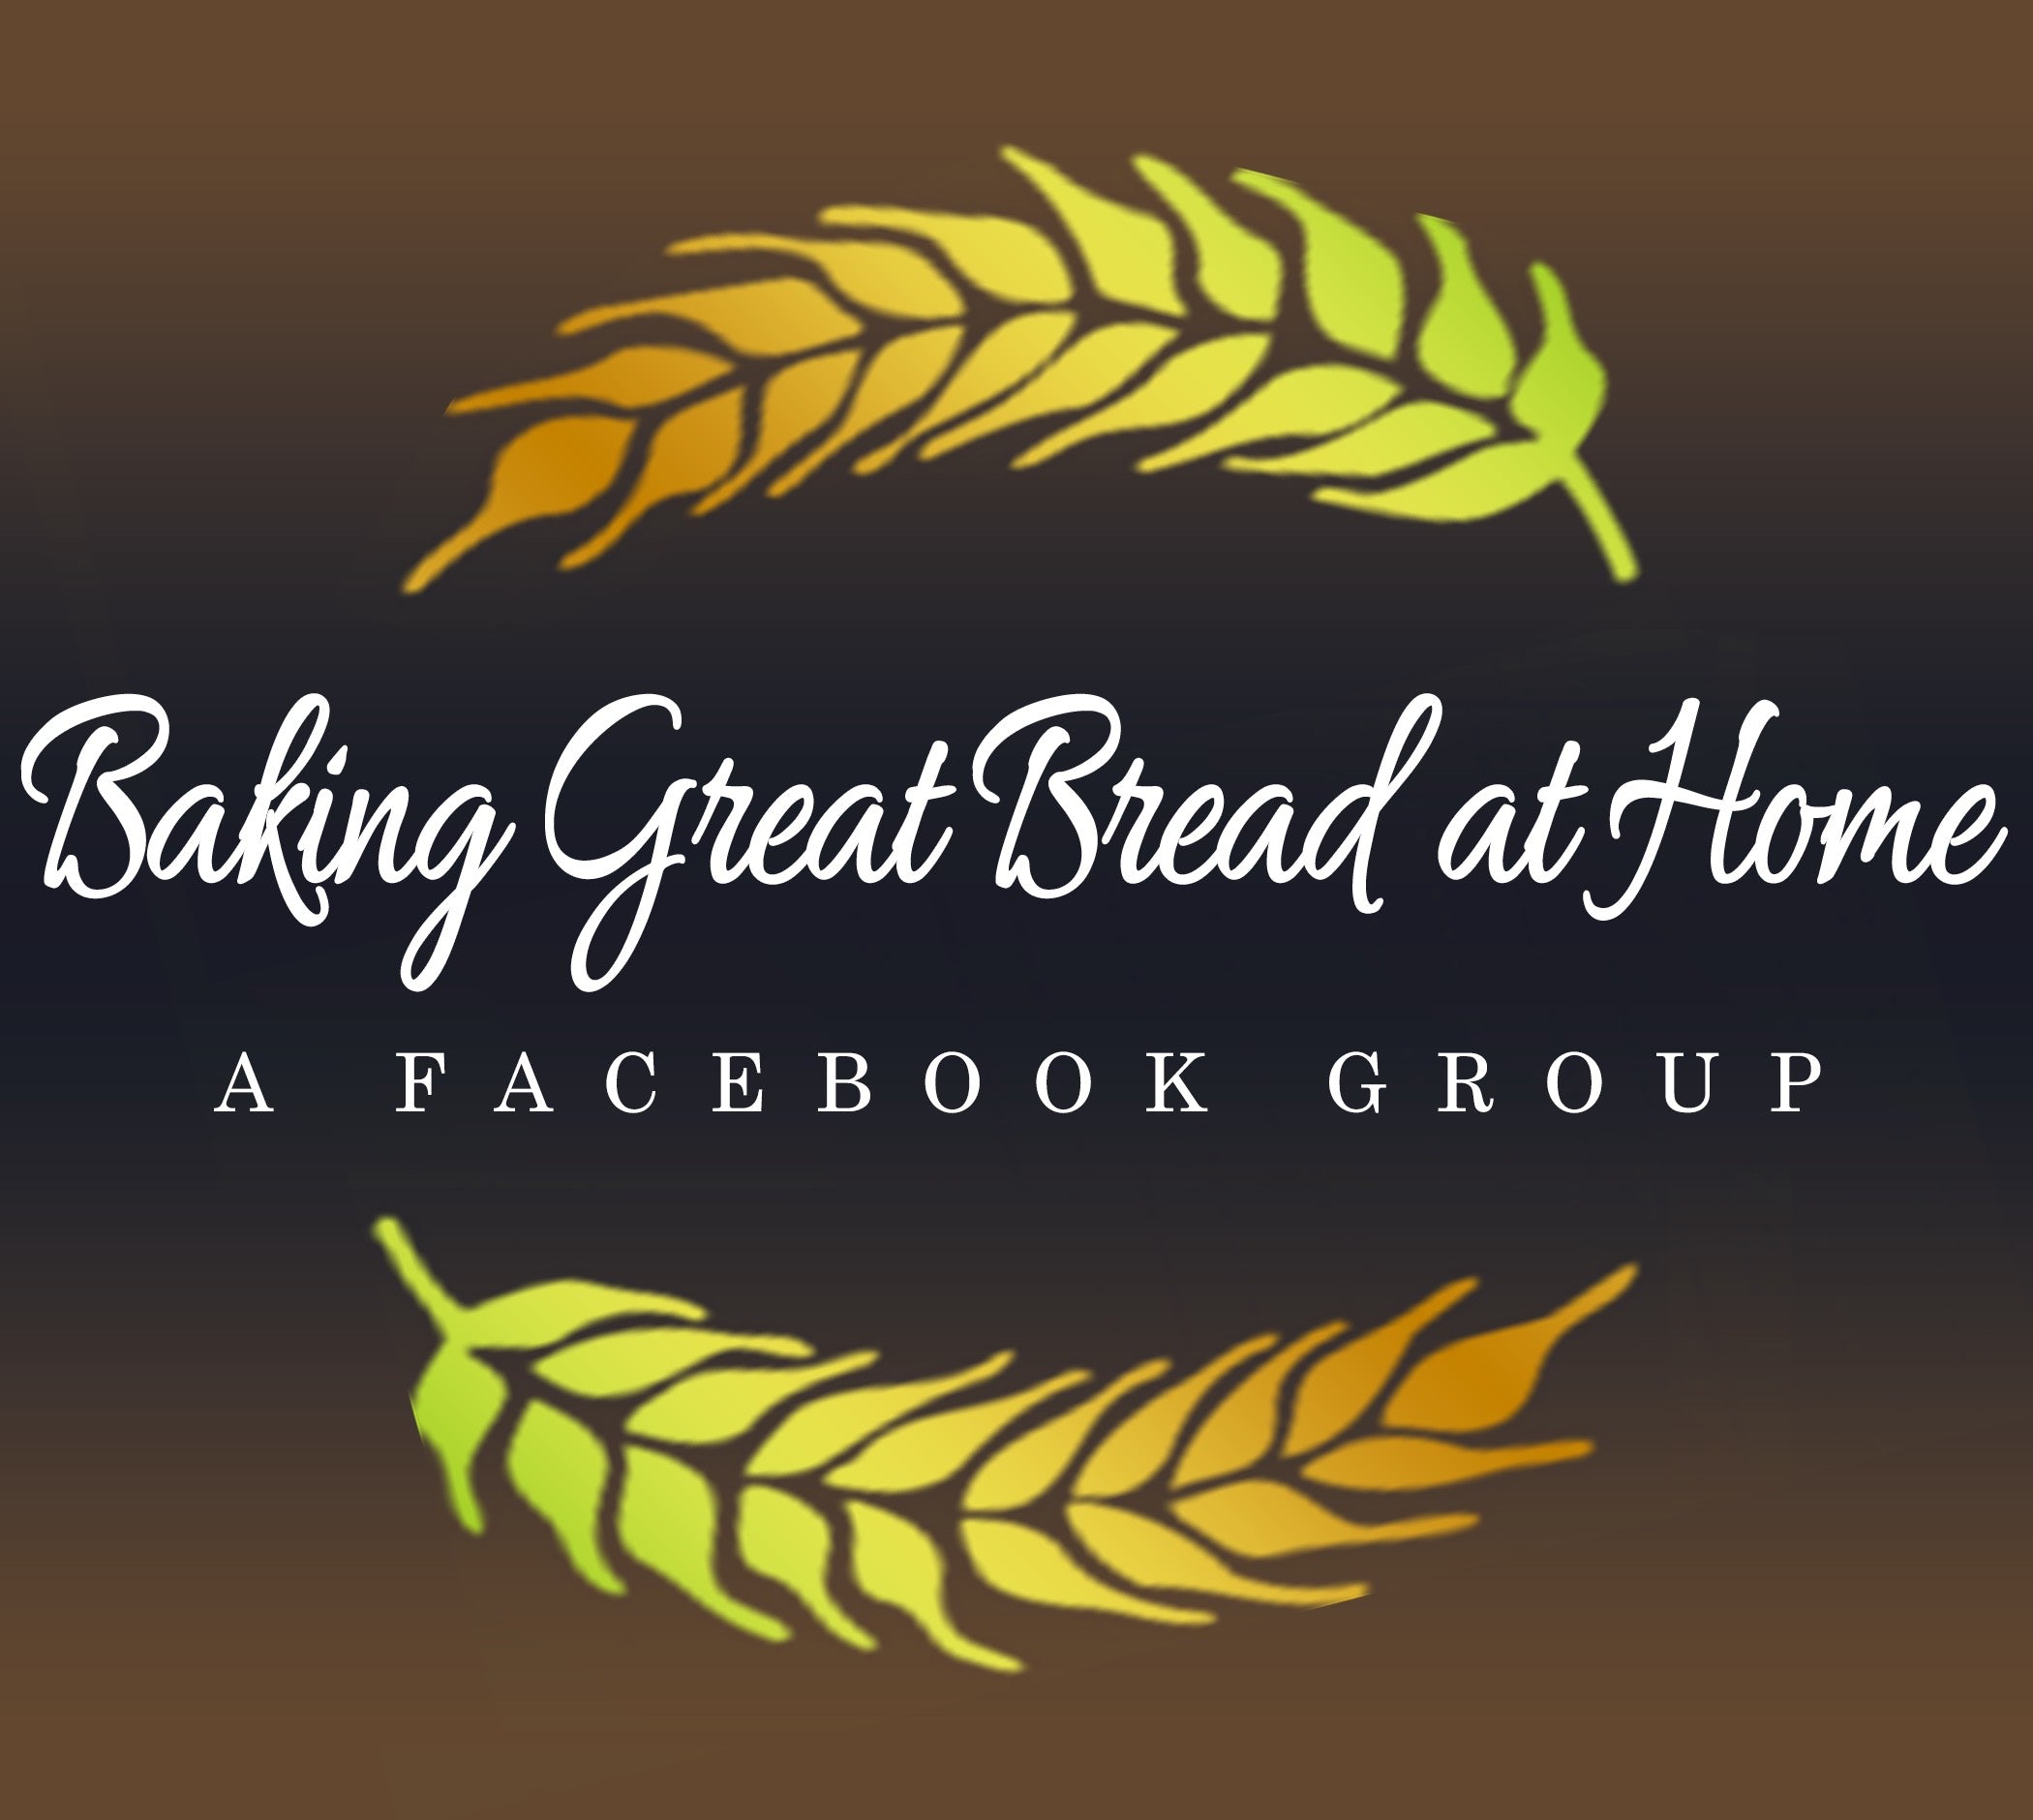 Baking Great Bread at Home